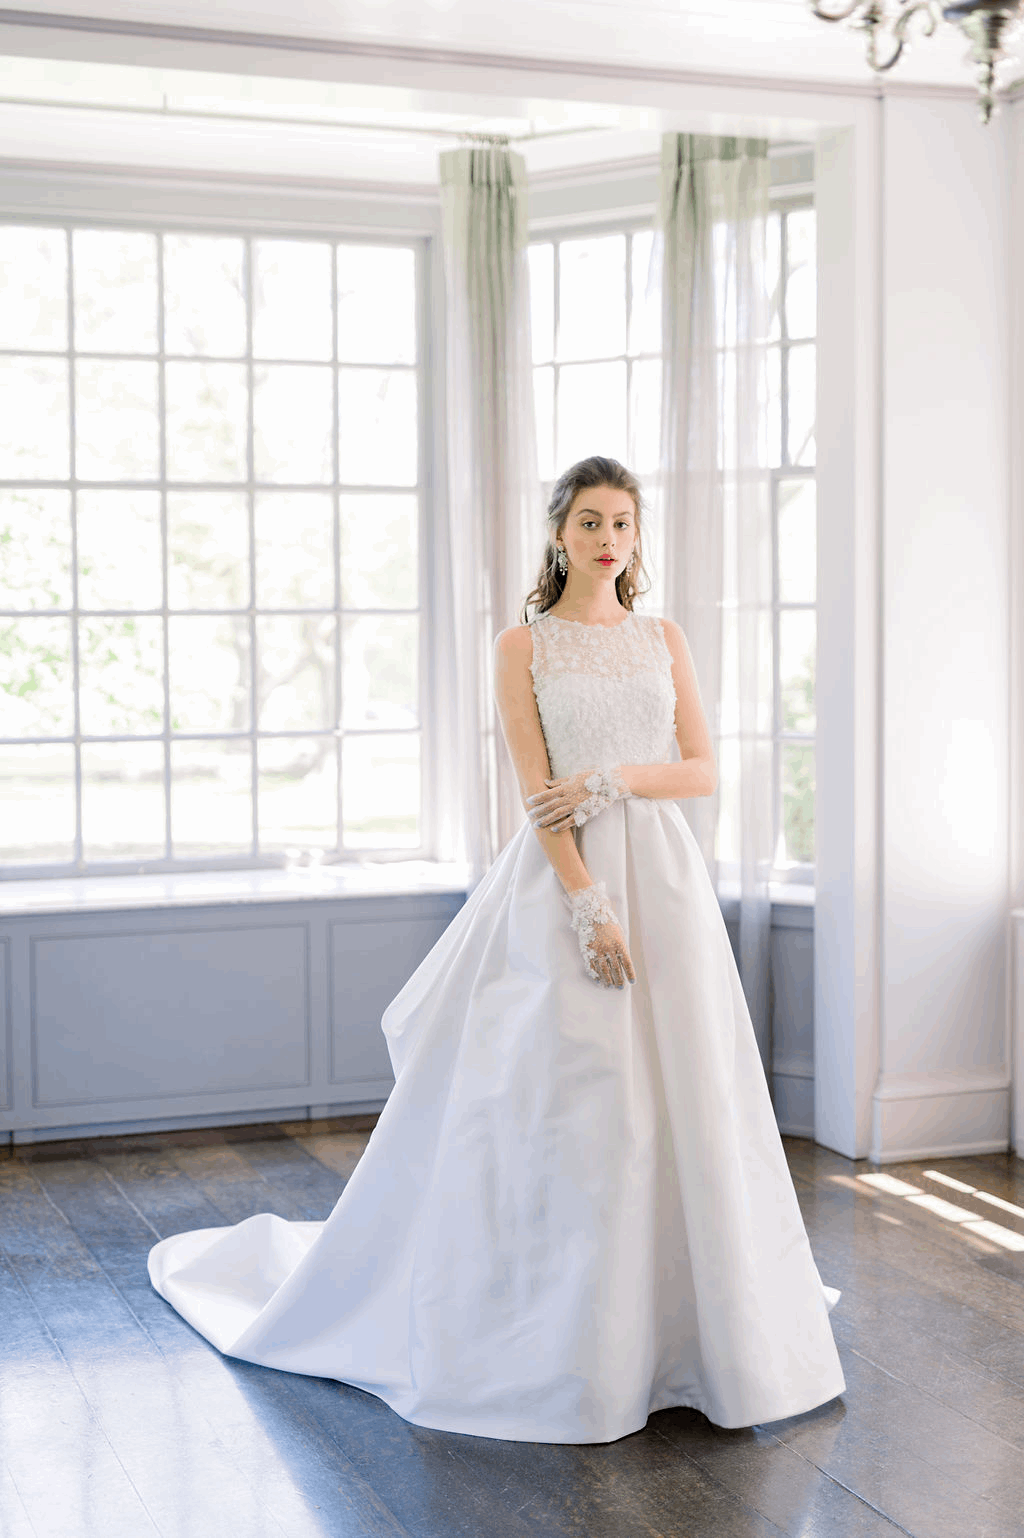 Ann by Catherine Langlois. Timeless silk Mikado wedding dress with 3D lace. Handmade to order in Toronto, Ontario, Canada.